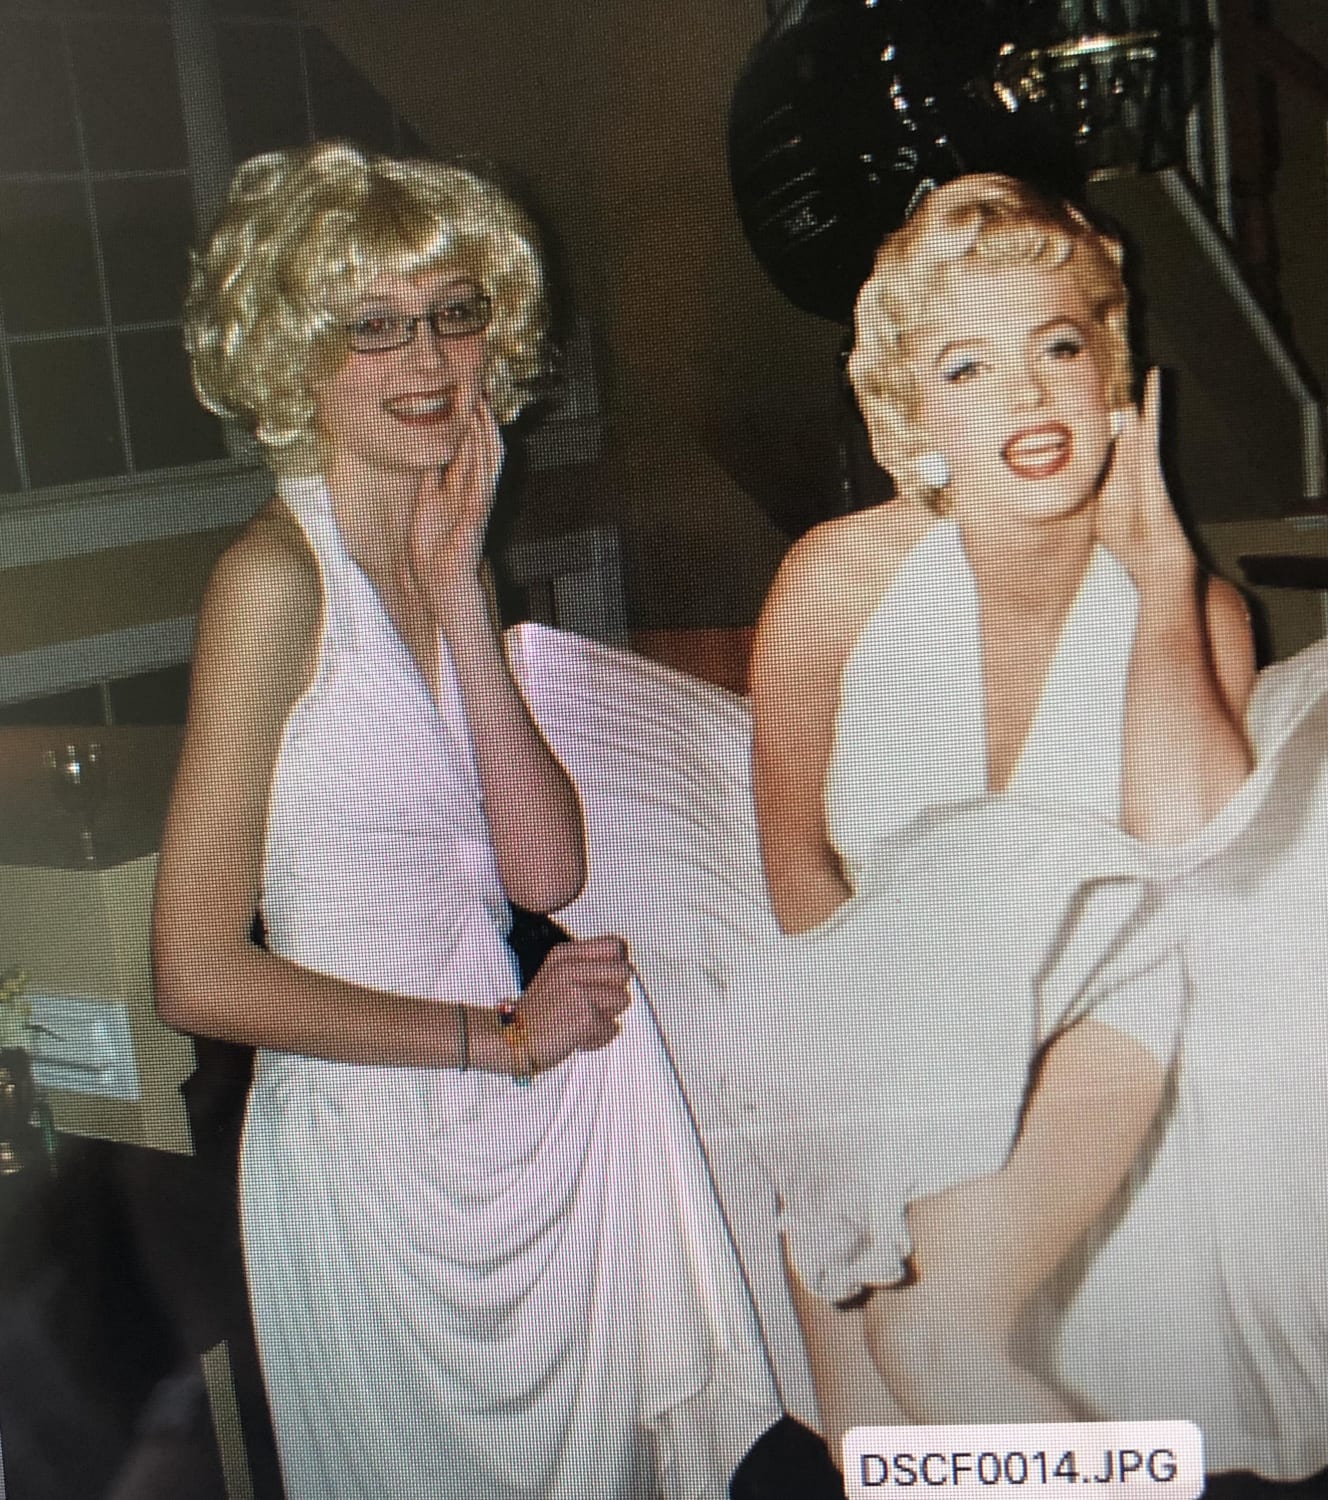 My 15th birthday party was old Hollywood themed